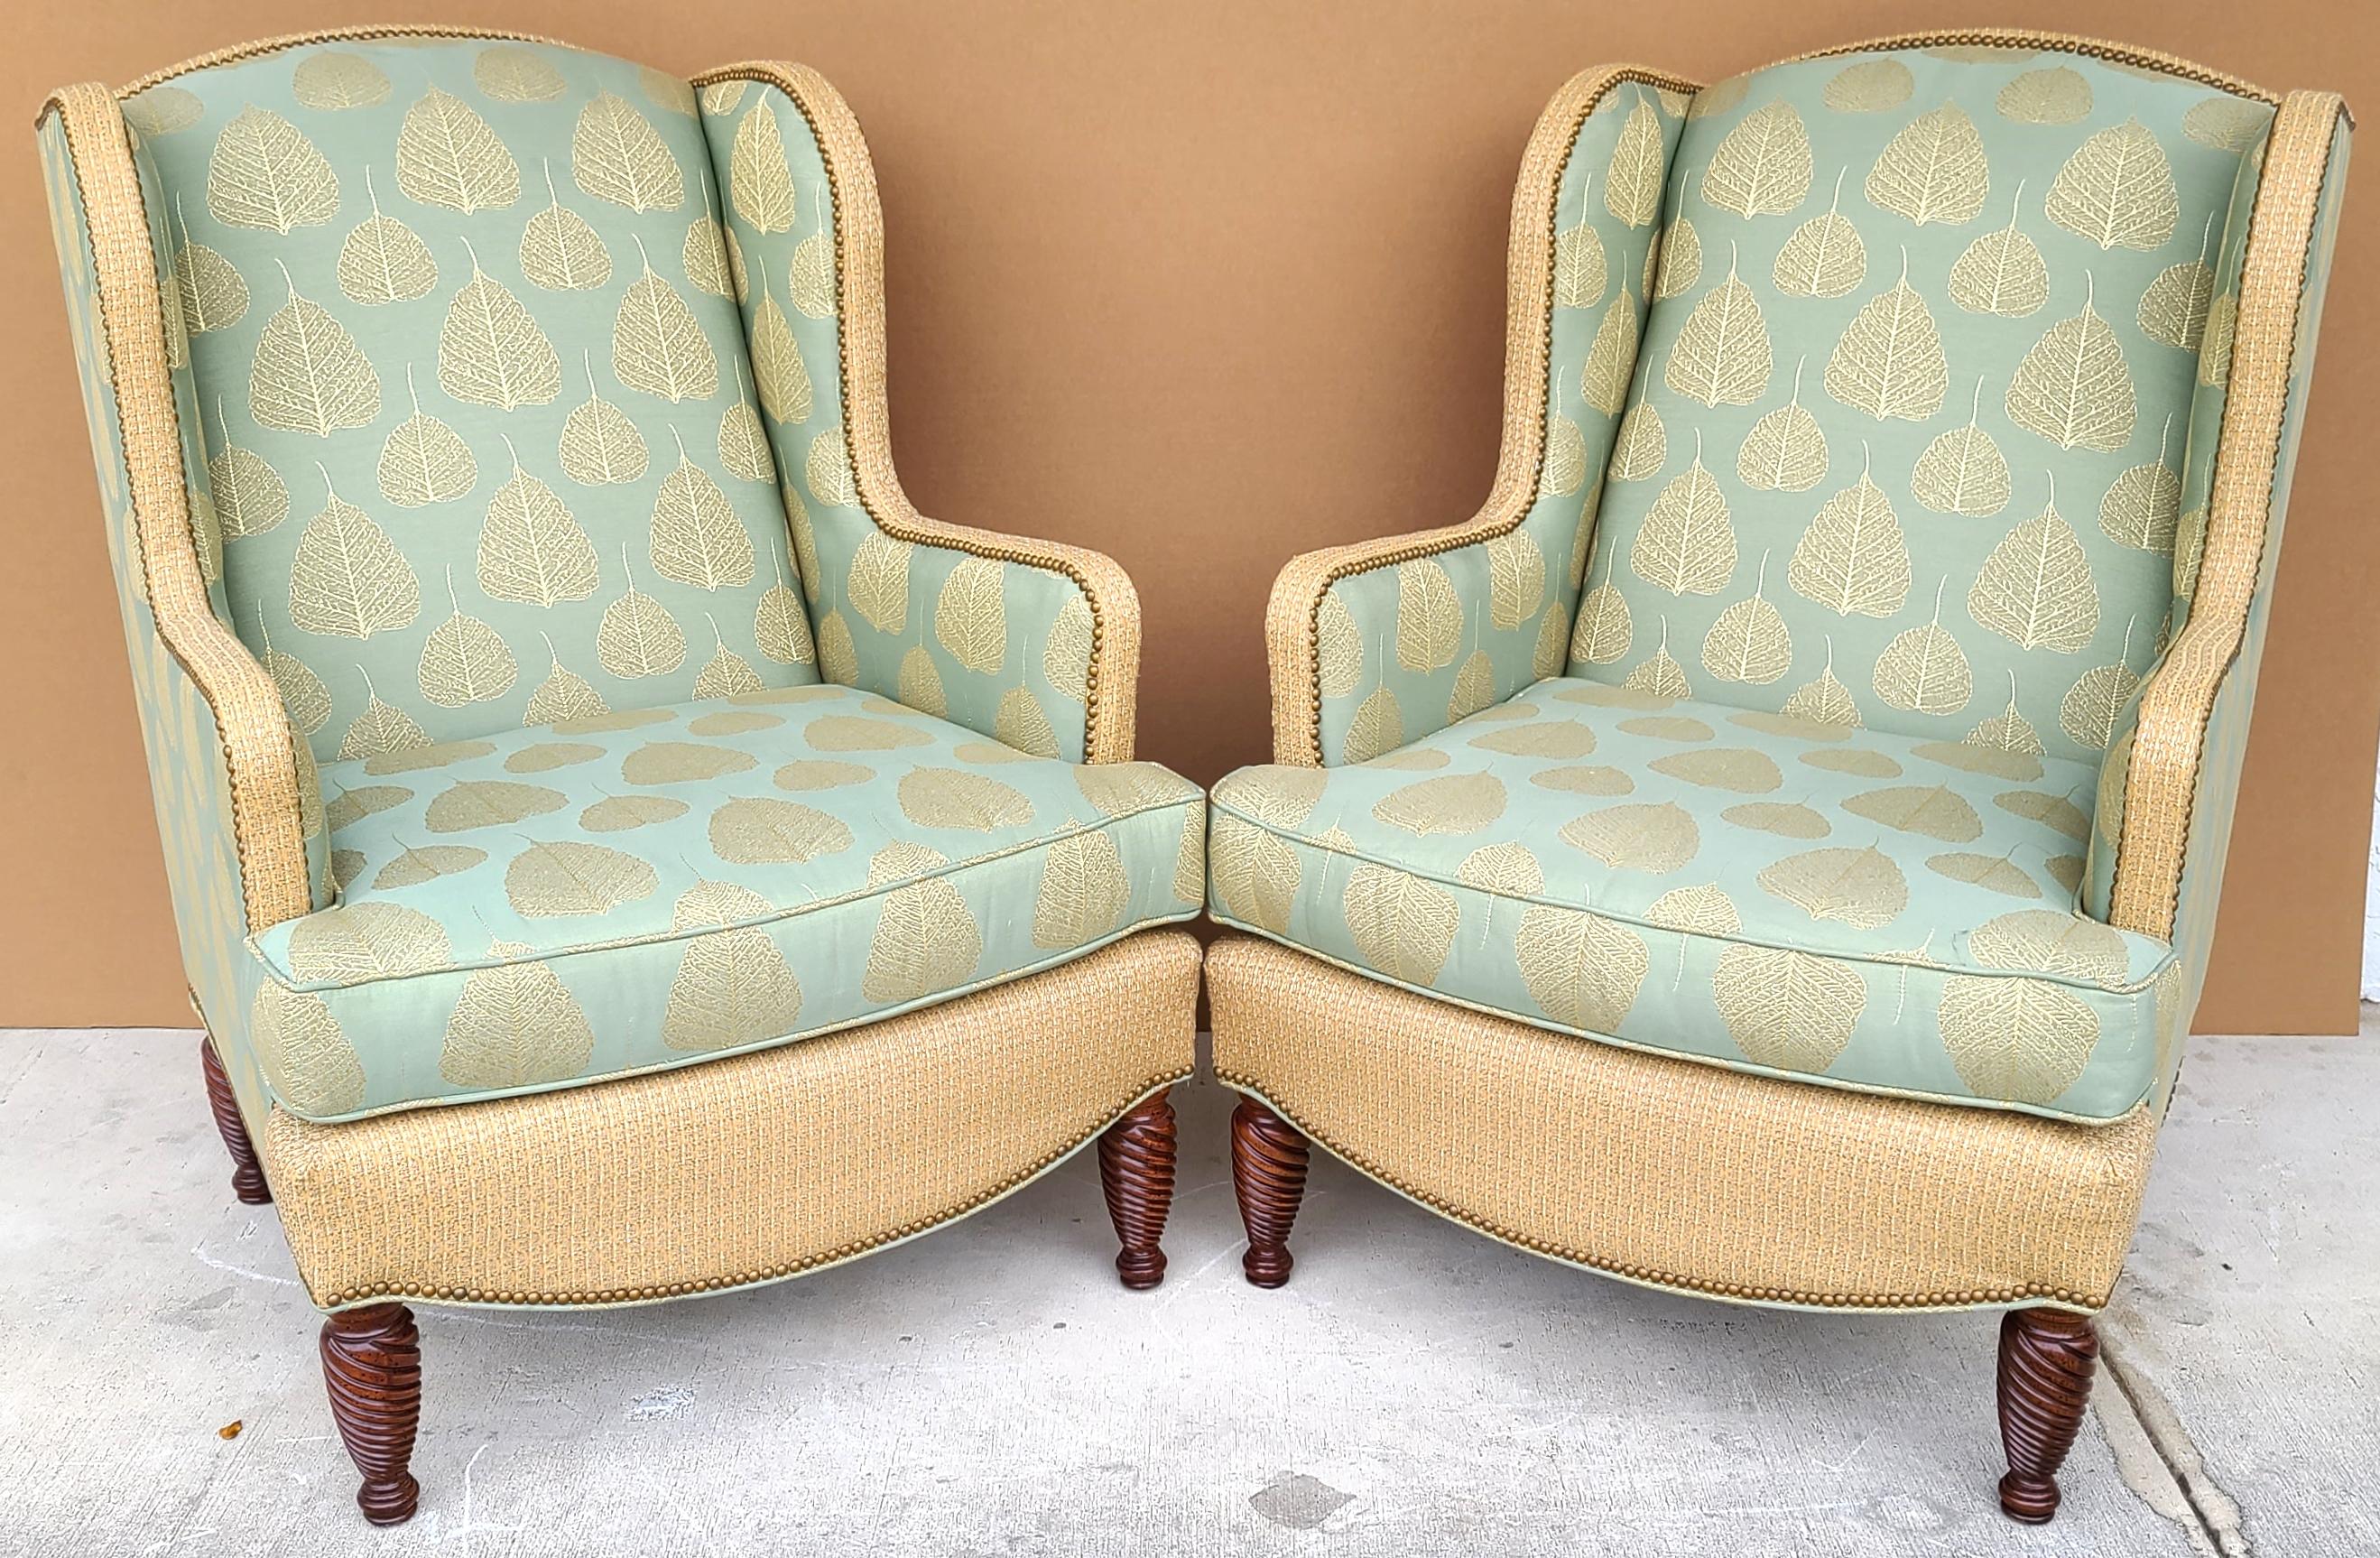 Offering one of our recent palm beach estate fine furniture acquisitions of a
pair of substantial chippendale wingback armchairs by Hekman Woodmark
Very large and heavy chairs featuring burnout satin cotton with velvet leaf design, and brass nail